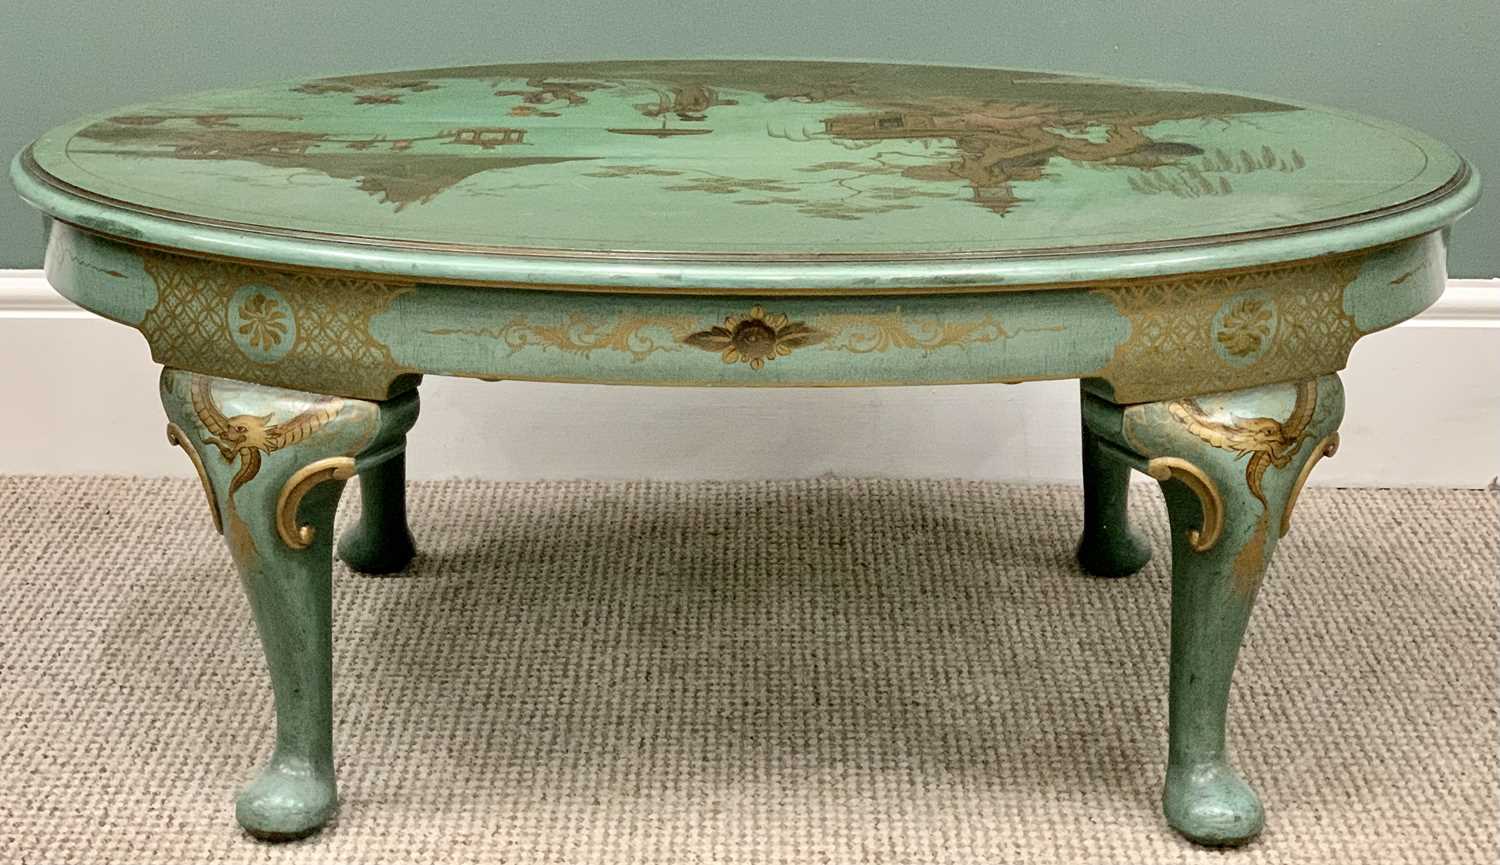 COFFEE TABLE - quality green chinoiserie decorated, oval topped with highly decorative lacquerwork - Image 2 of 2